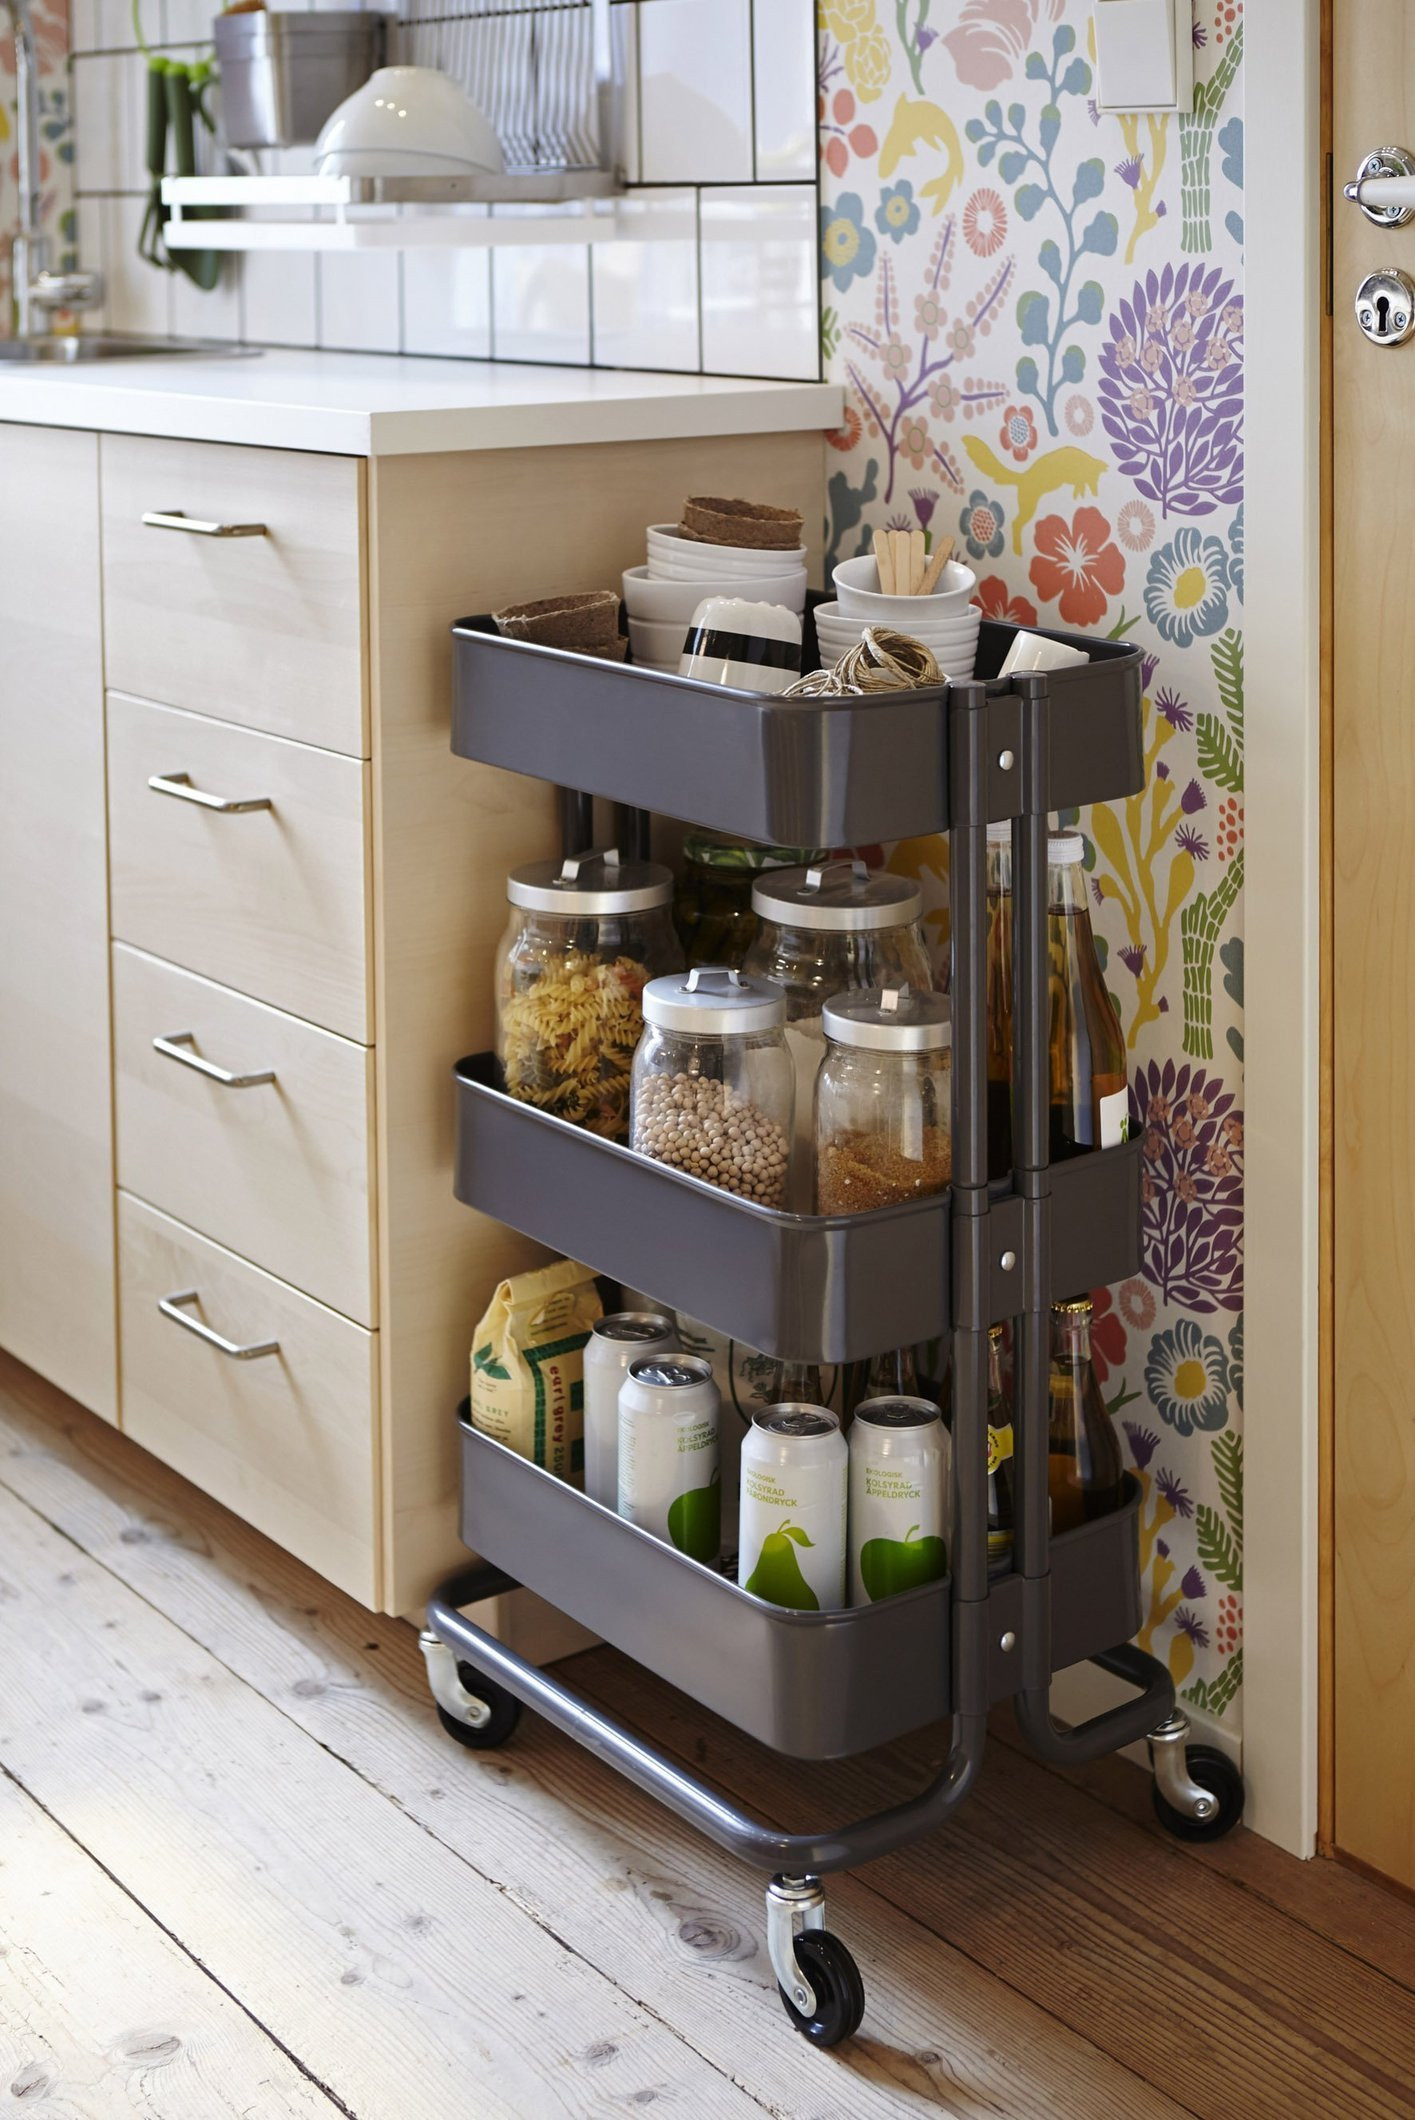 Ikea Kitchen Organization
 6 Clever IKEA Storage Solutions for Your Kitchen Basic